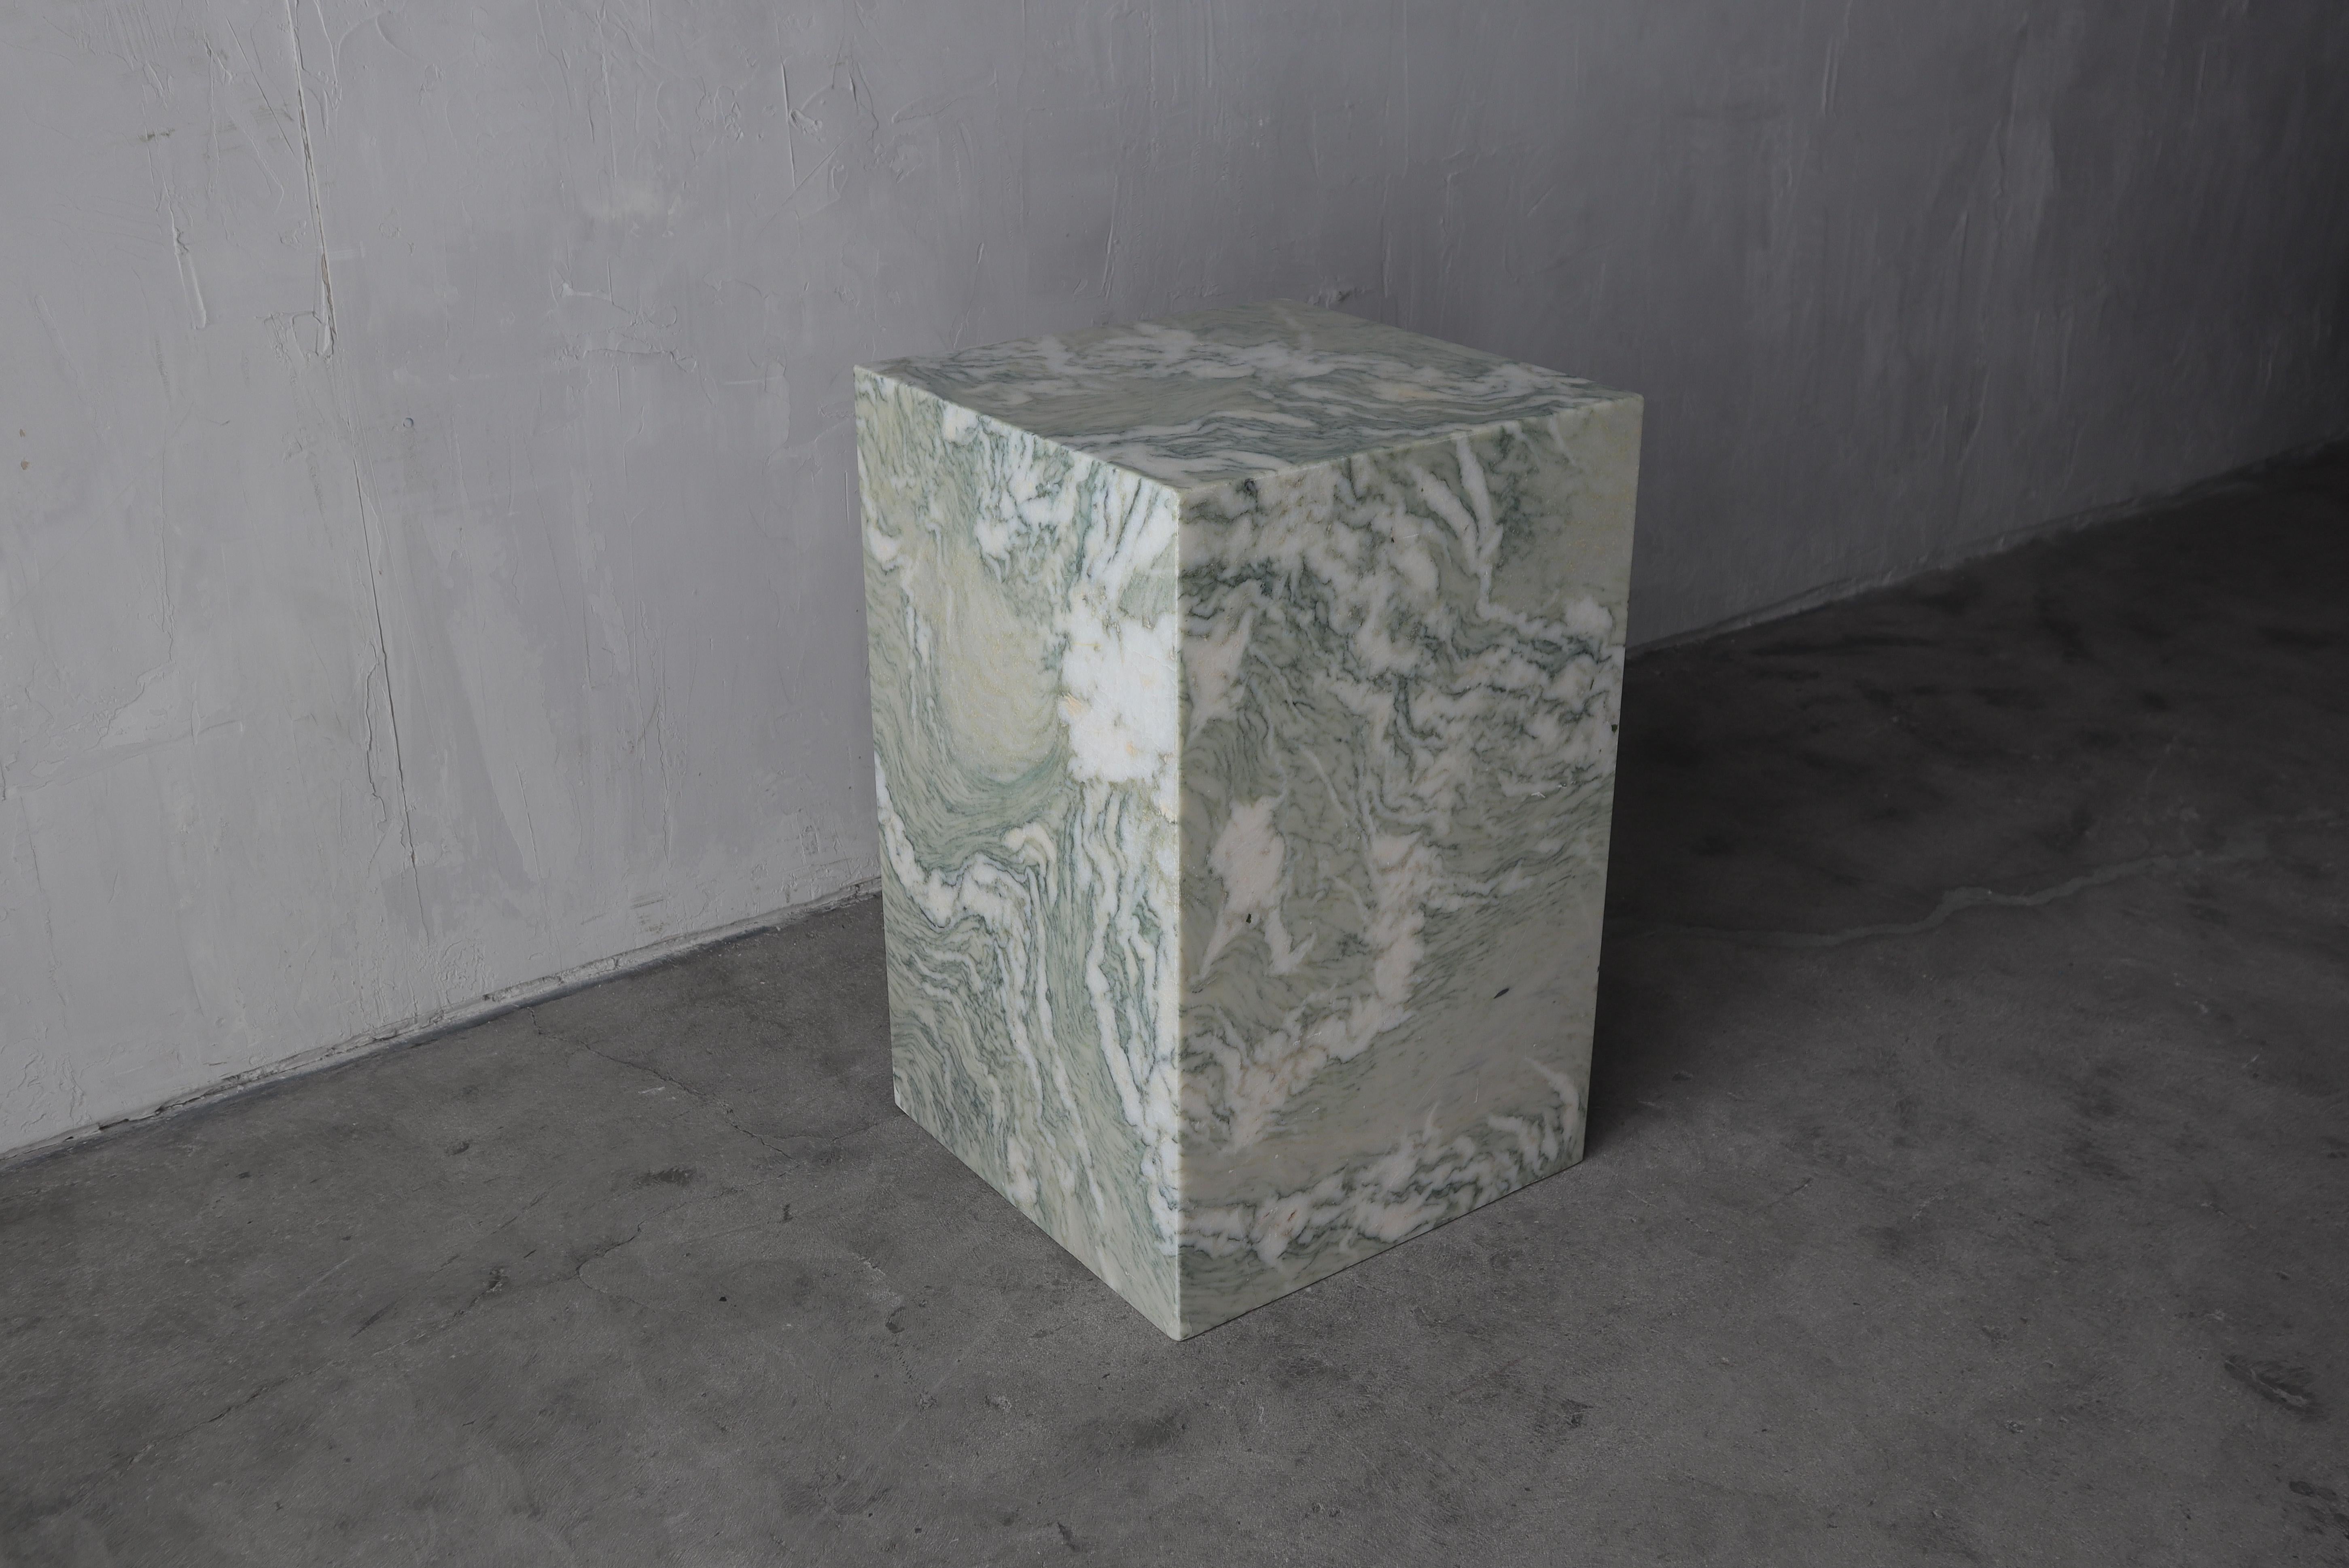 Stunning green marble rectangular pedestal. Perfect for displaying your favorite sculpture or art piece. Can also be used as a high side table.

The pedestal measures 28